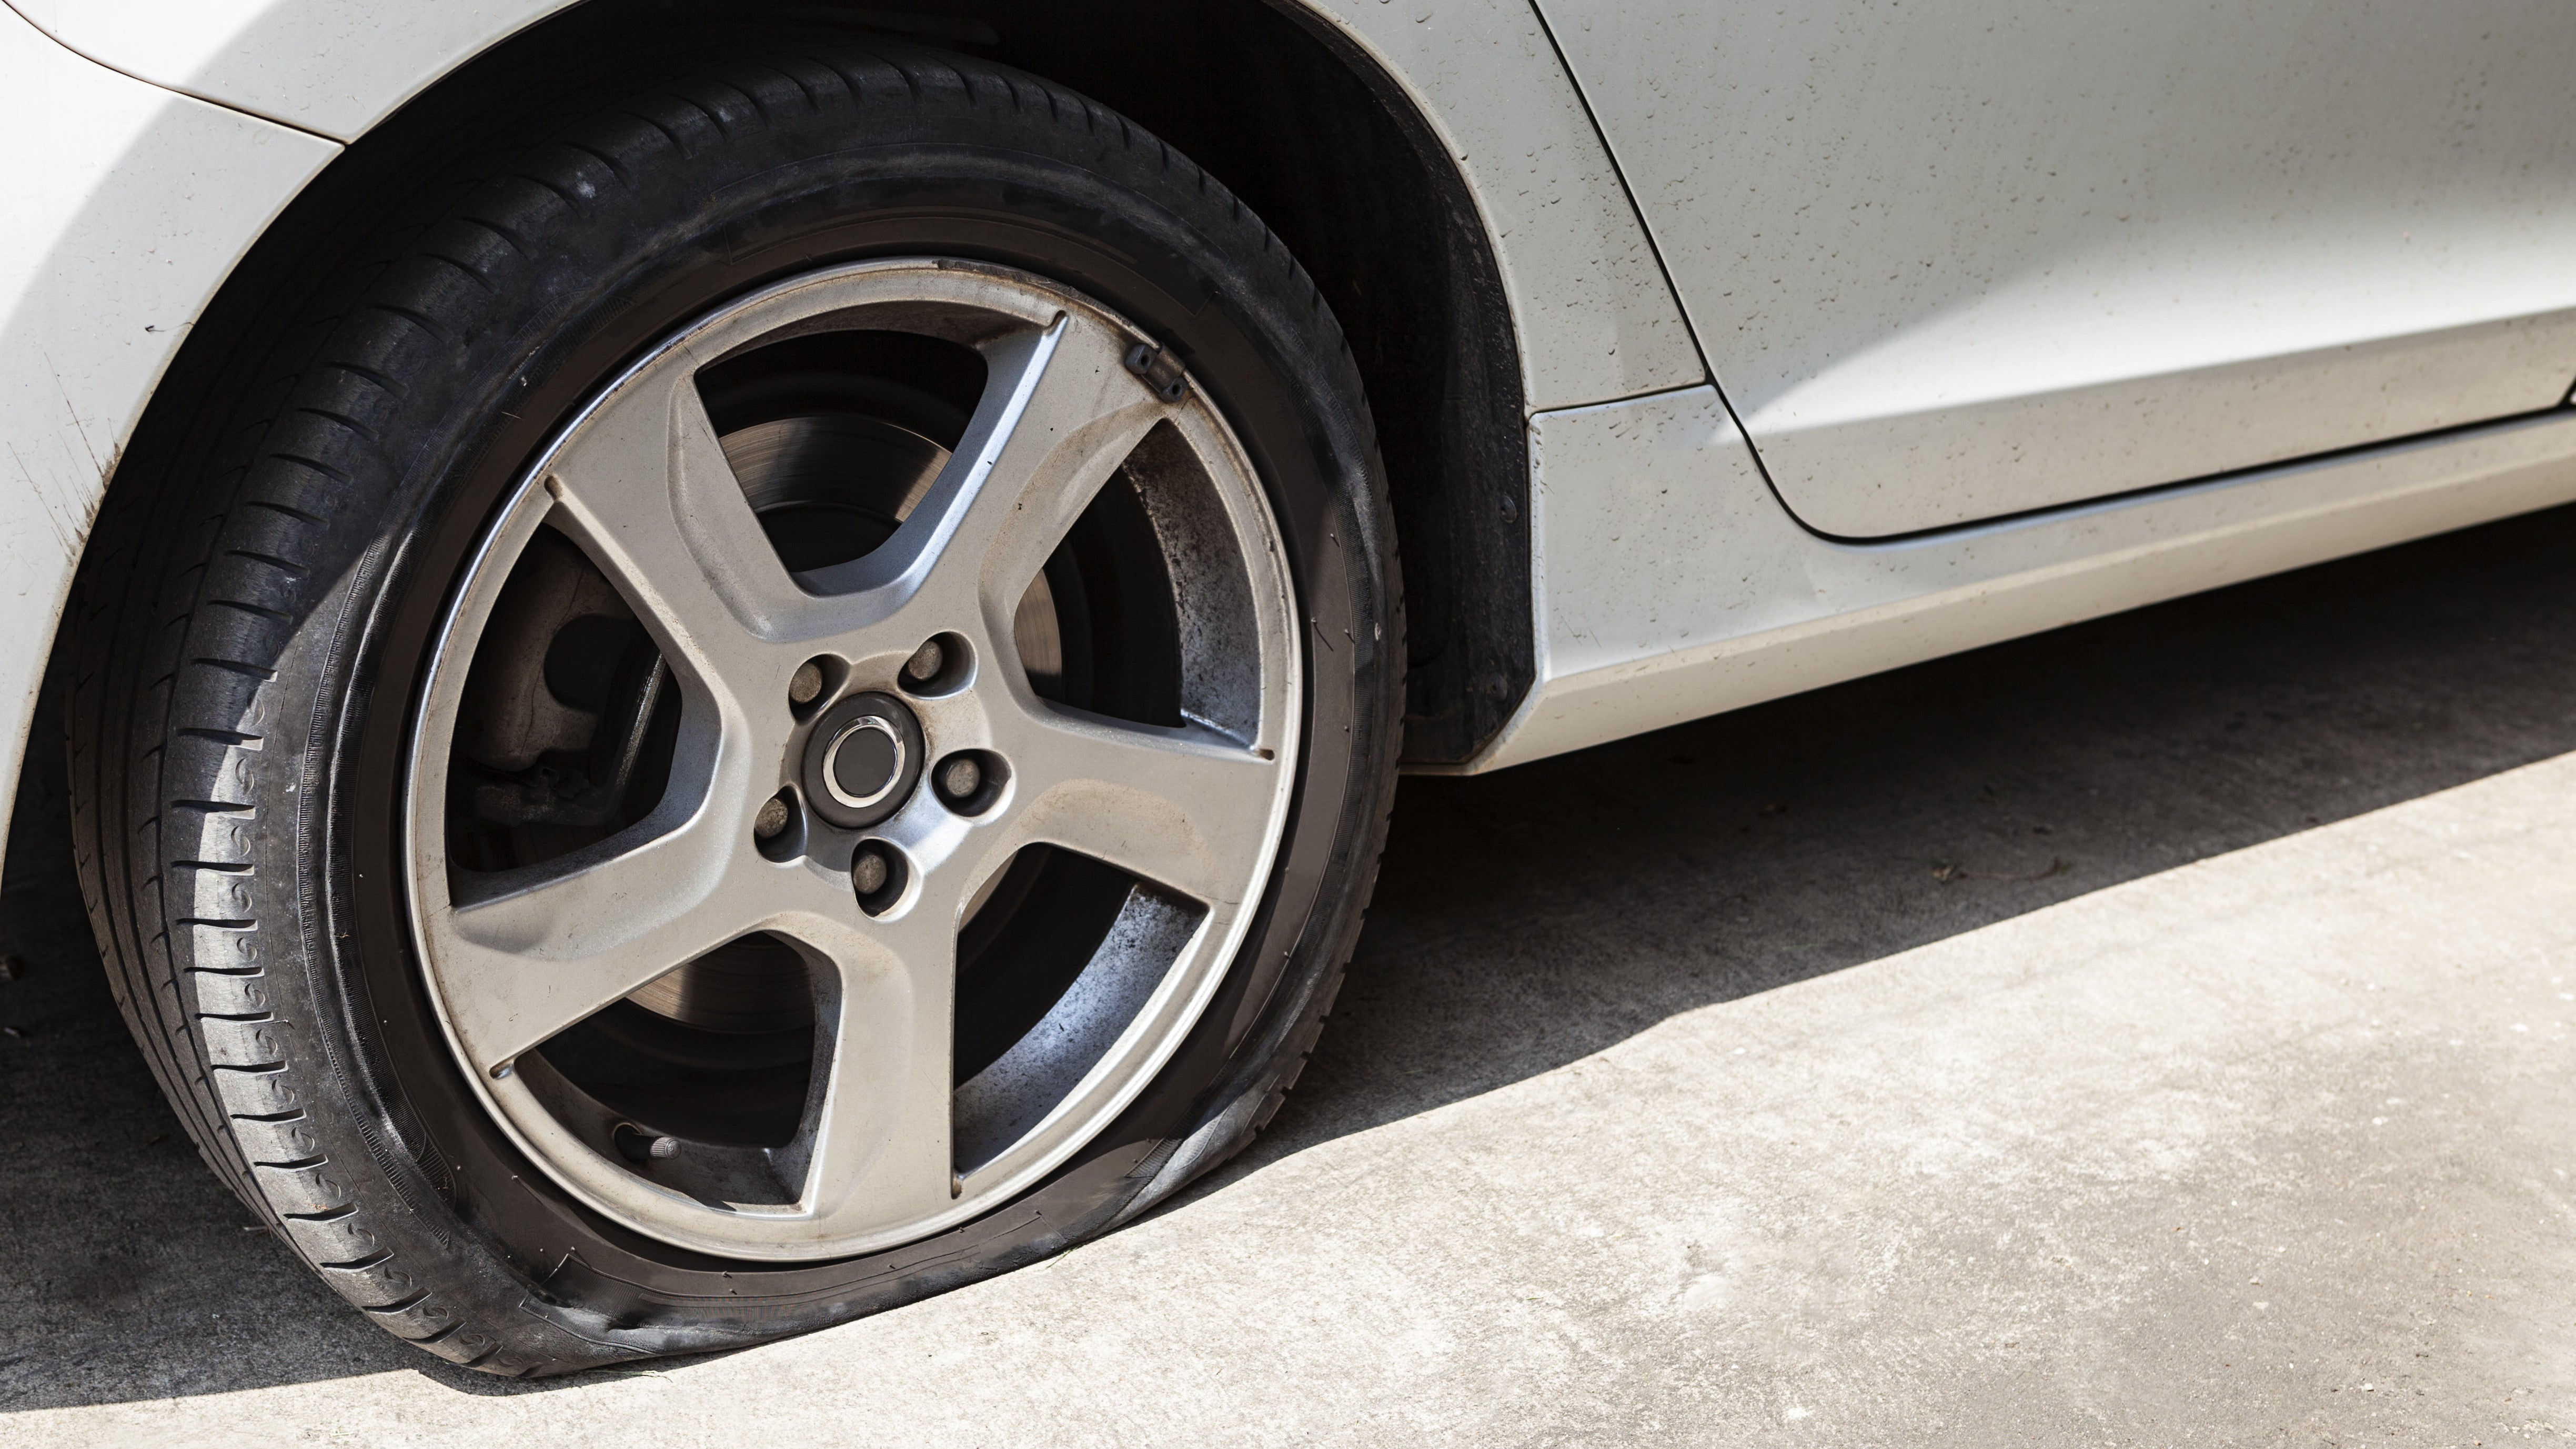 Take Multiple Pictures Of Your Next Flat Tire So You Can Re-Use The Excuse In The Future